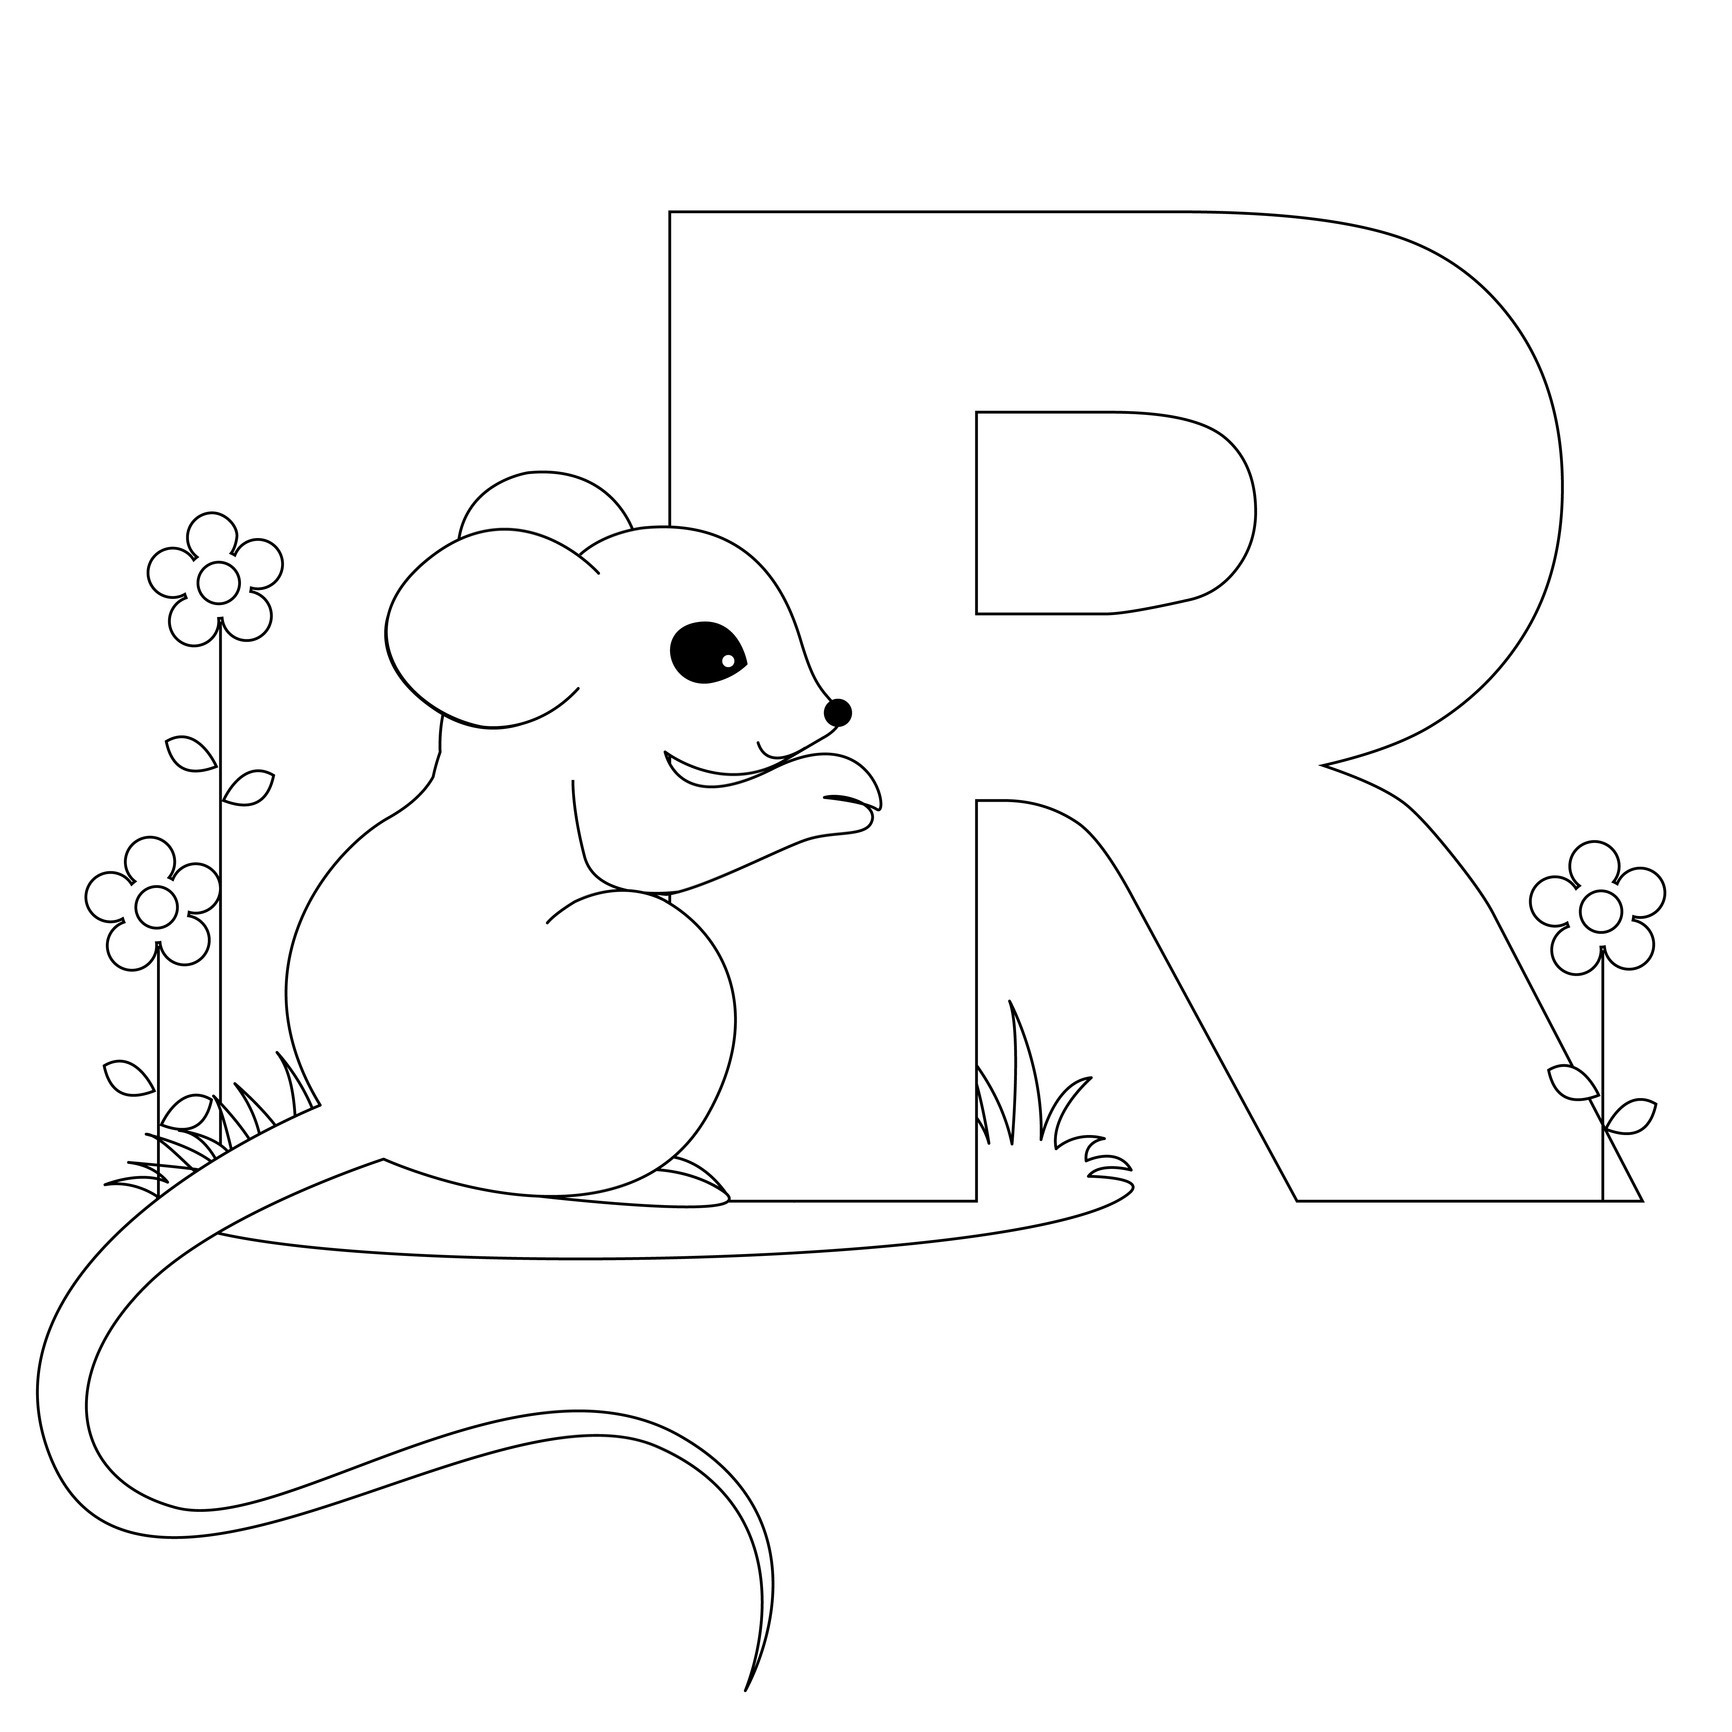 Free Printable Alphabet Coloring Pages for Kids - Best ...